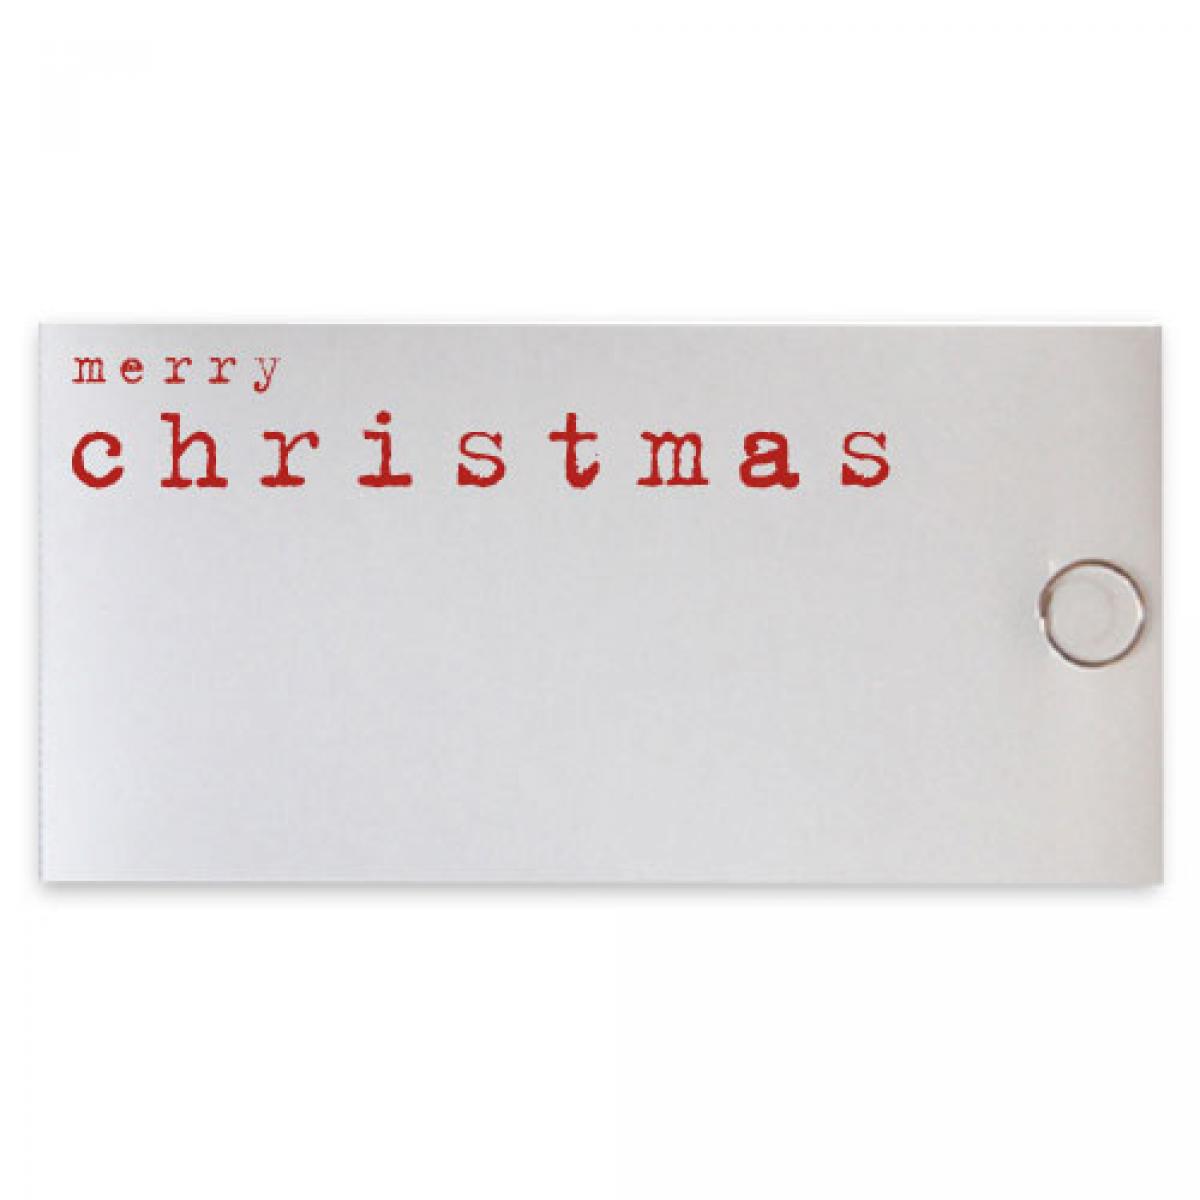 Christmas Cards for a Tealight Candle: merry christmas